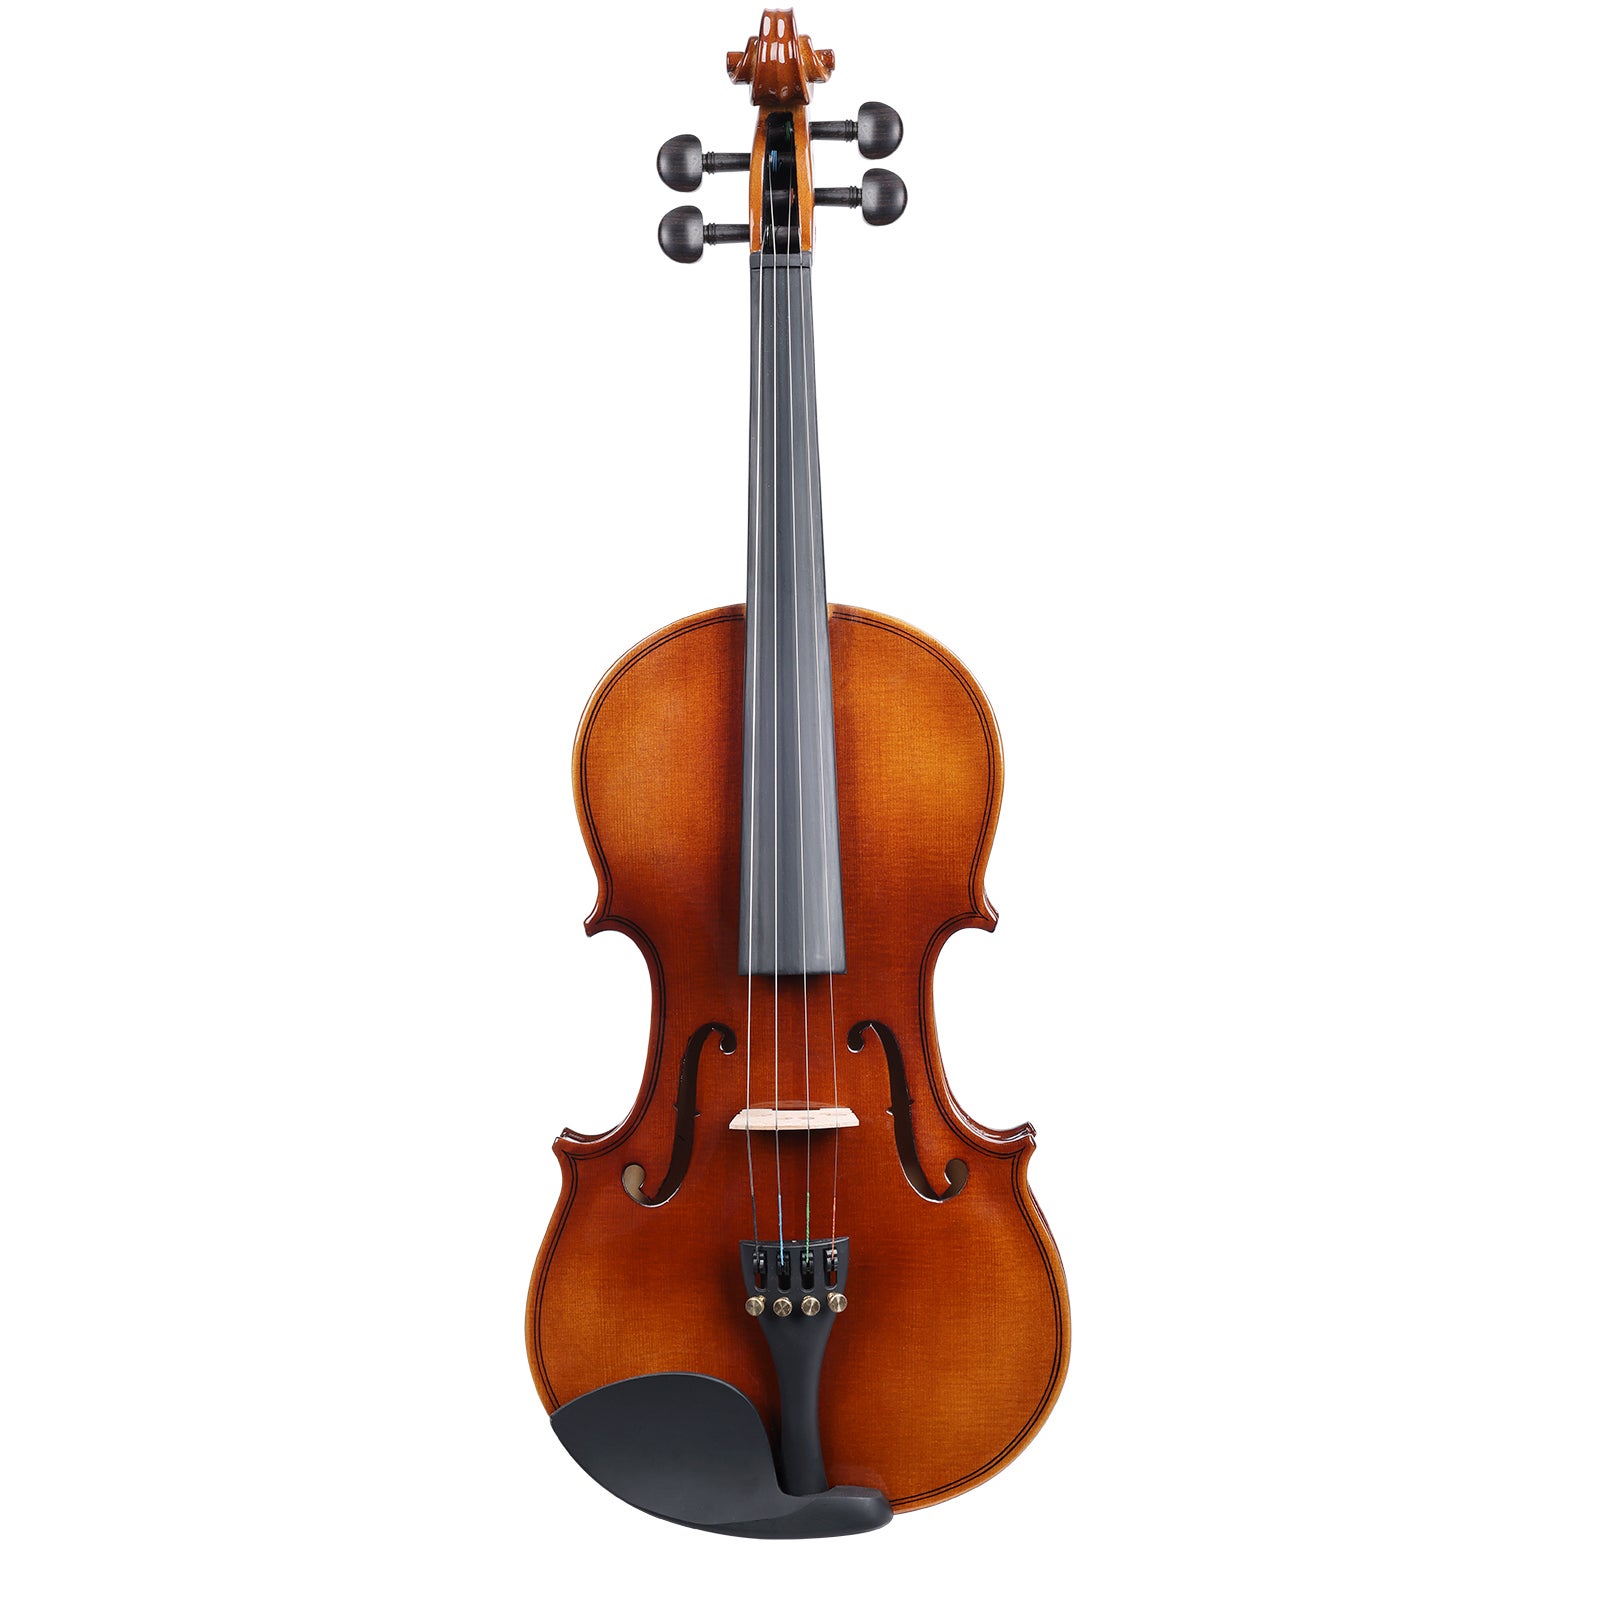 Axiom Prelude Violin Outfit - 1/8 (Eighth Size)